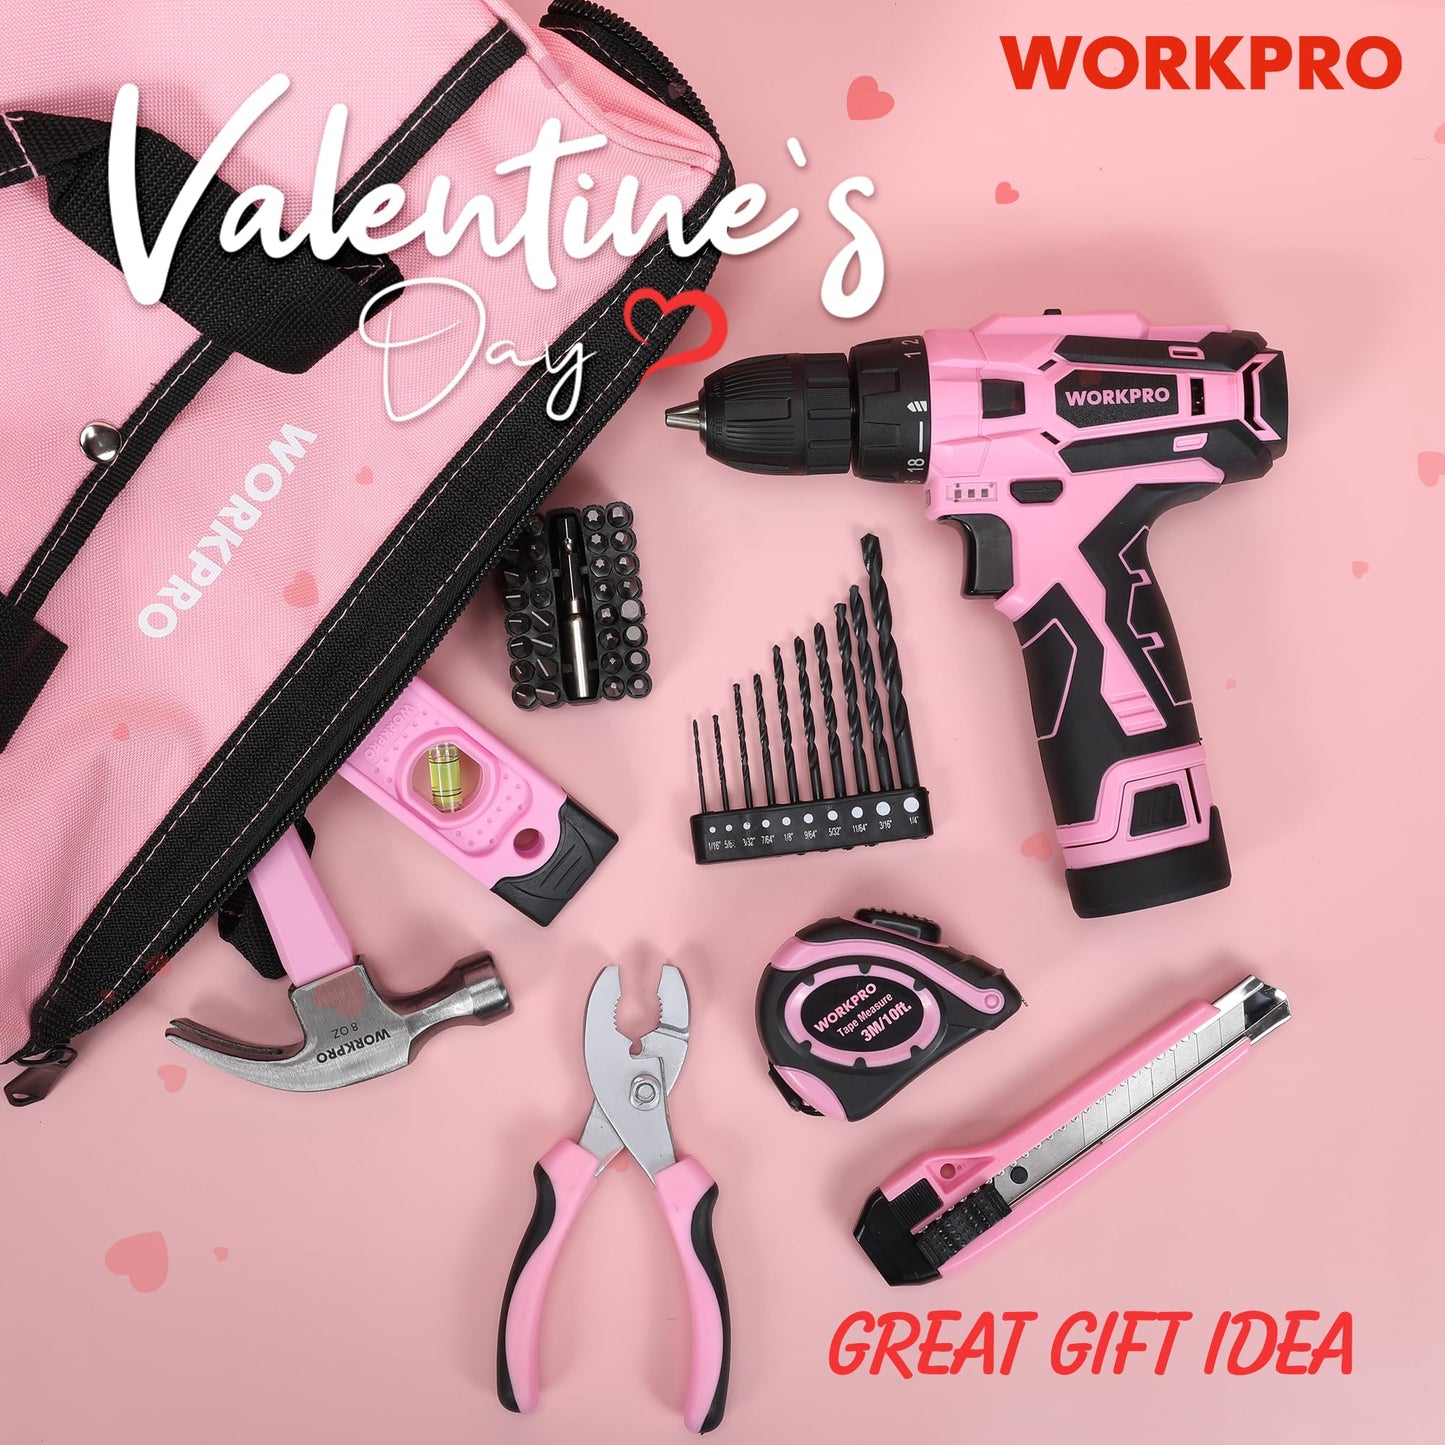 WORKPRO 12V Pink Cordless Drill Driver and Home Tool Kit, Hand Tool Set for DIY, Home Maintenance, 14-inch Storage Bag Included - Pink Ribbon